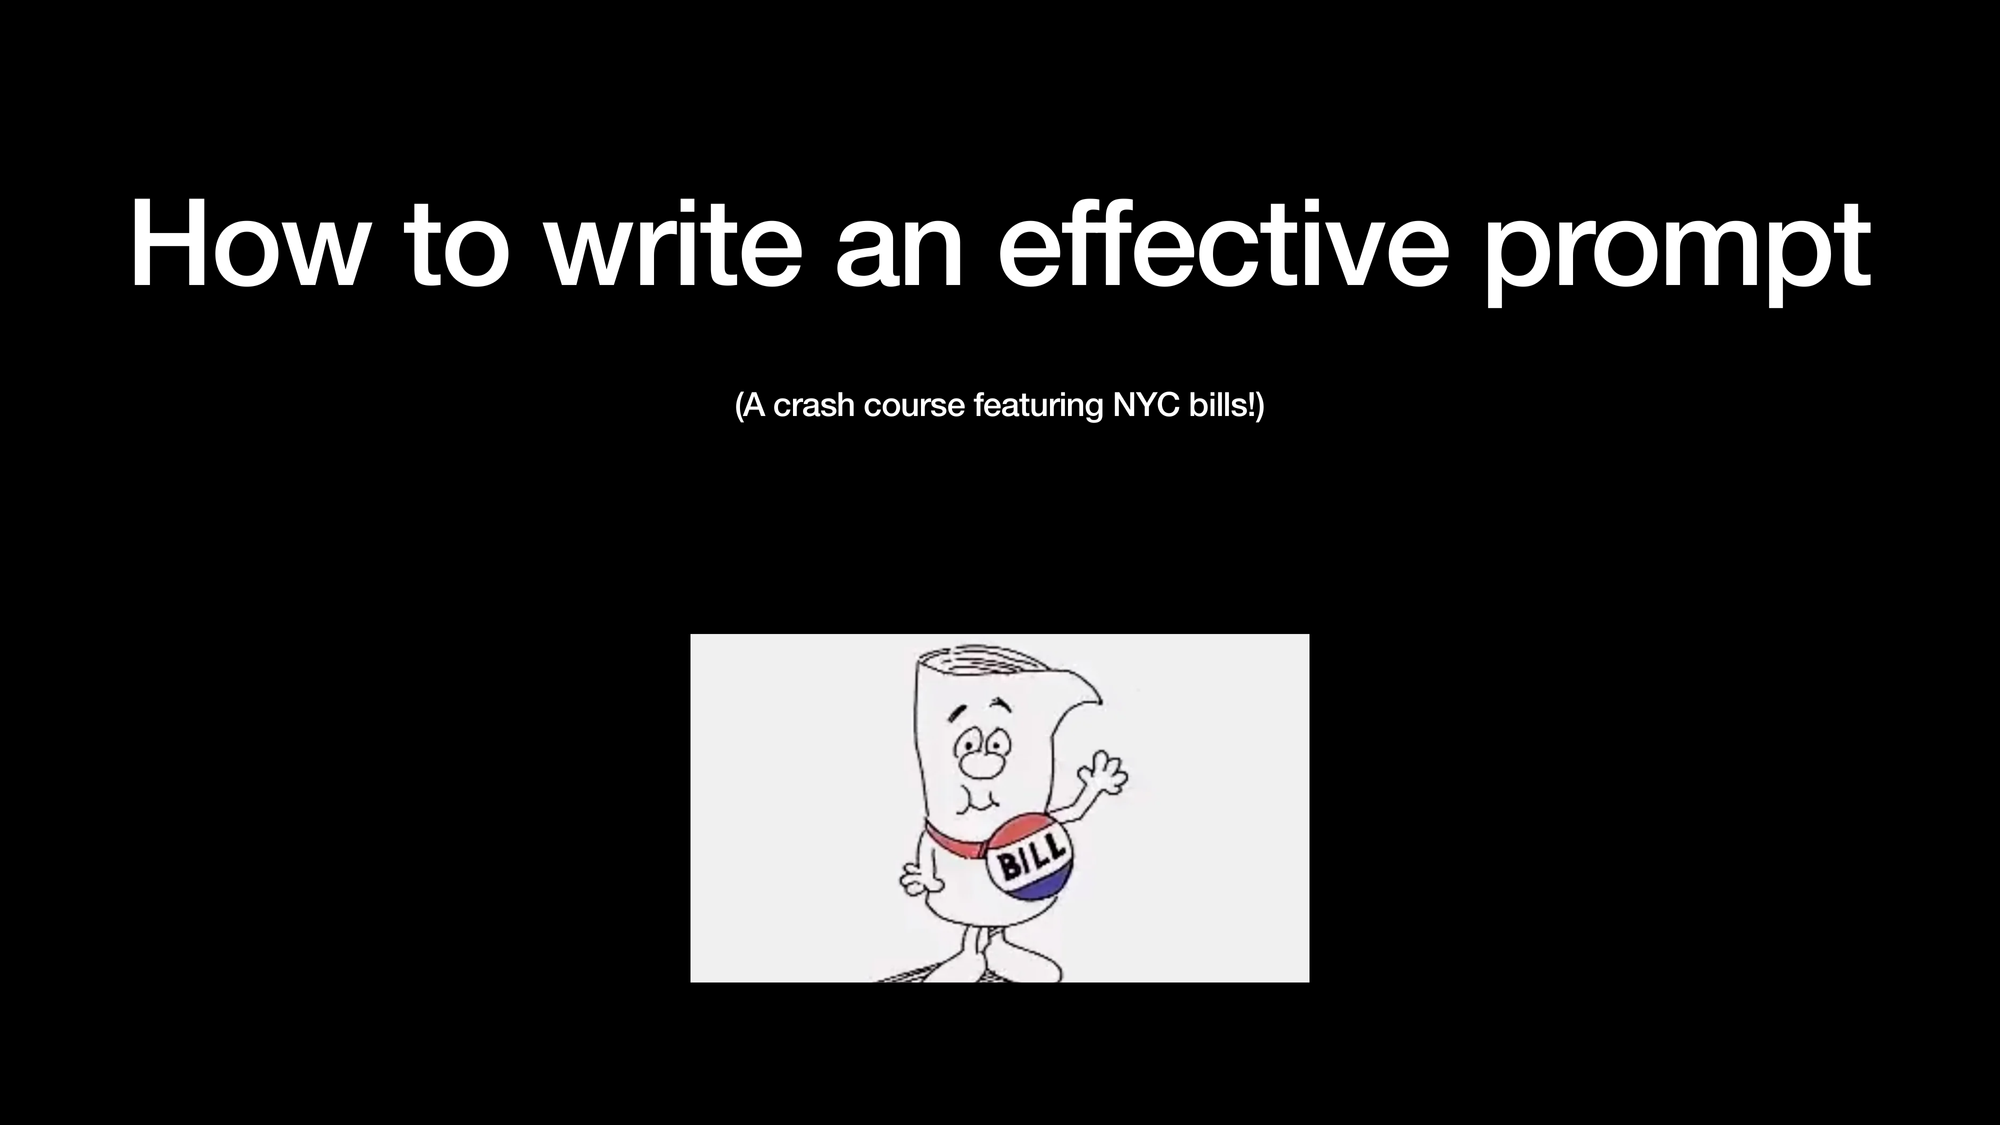 How to write an effective prompt (A crash course featuring NYC bills!) There is an illustration of the bill from Schoolhouse Rock on this slide.